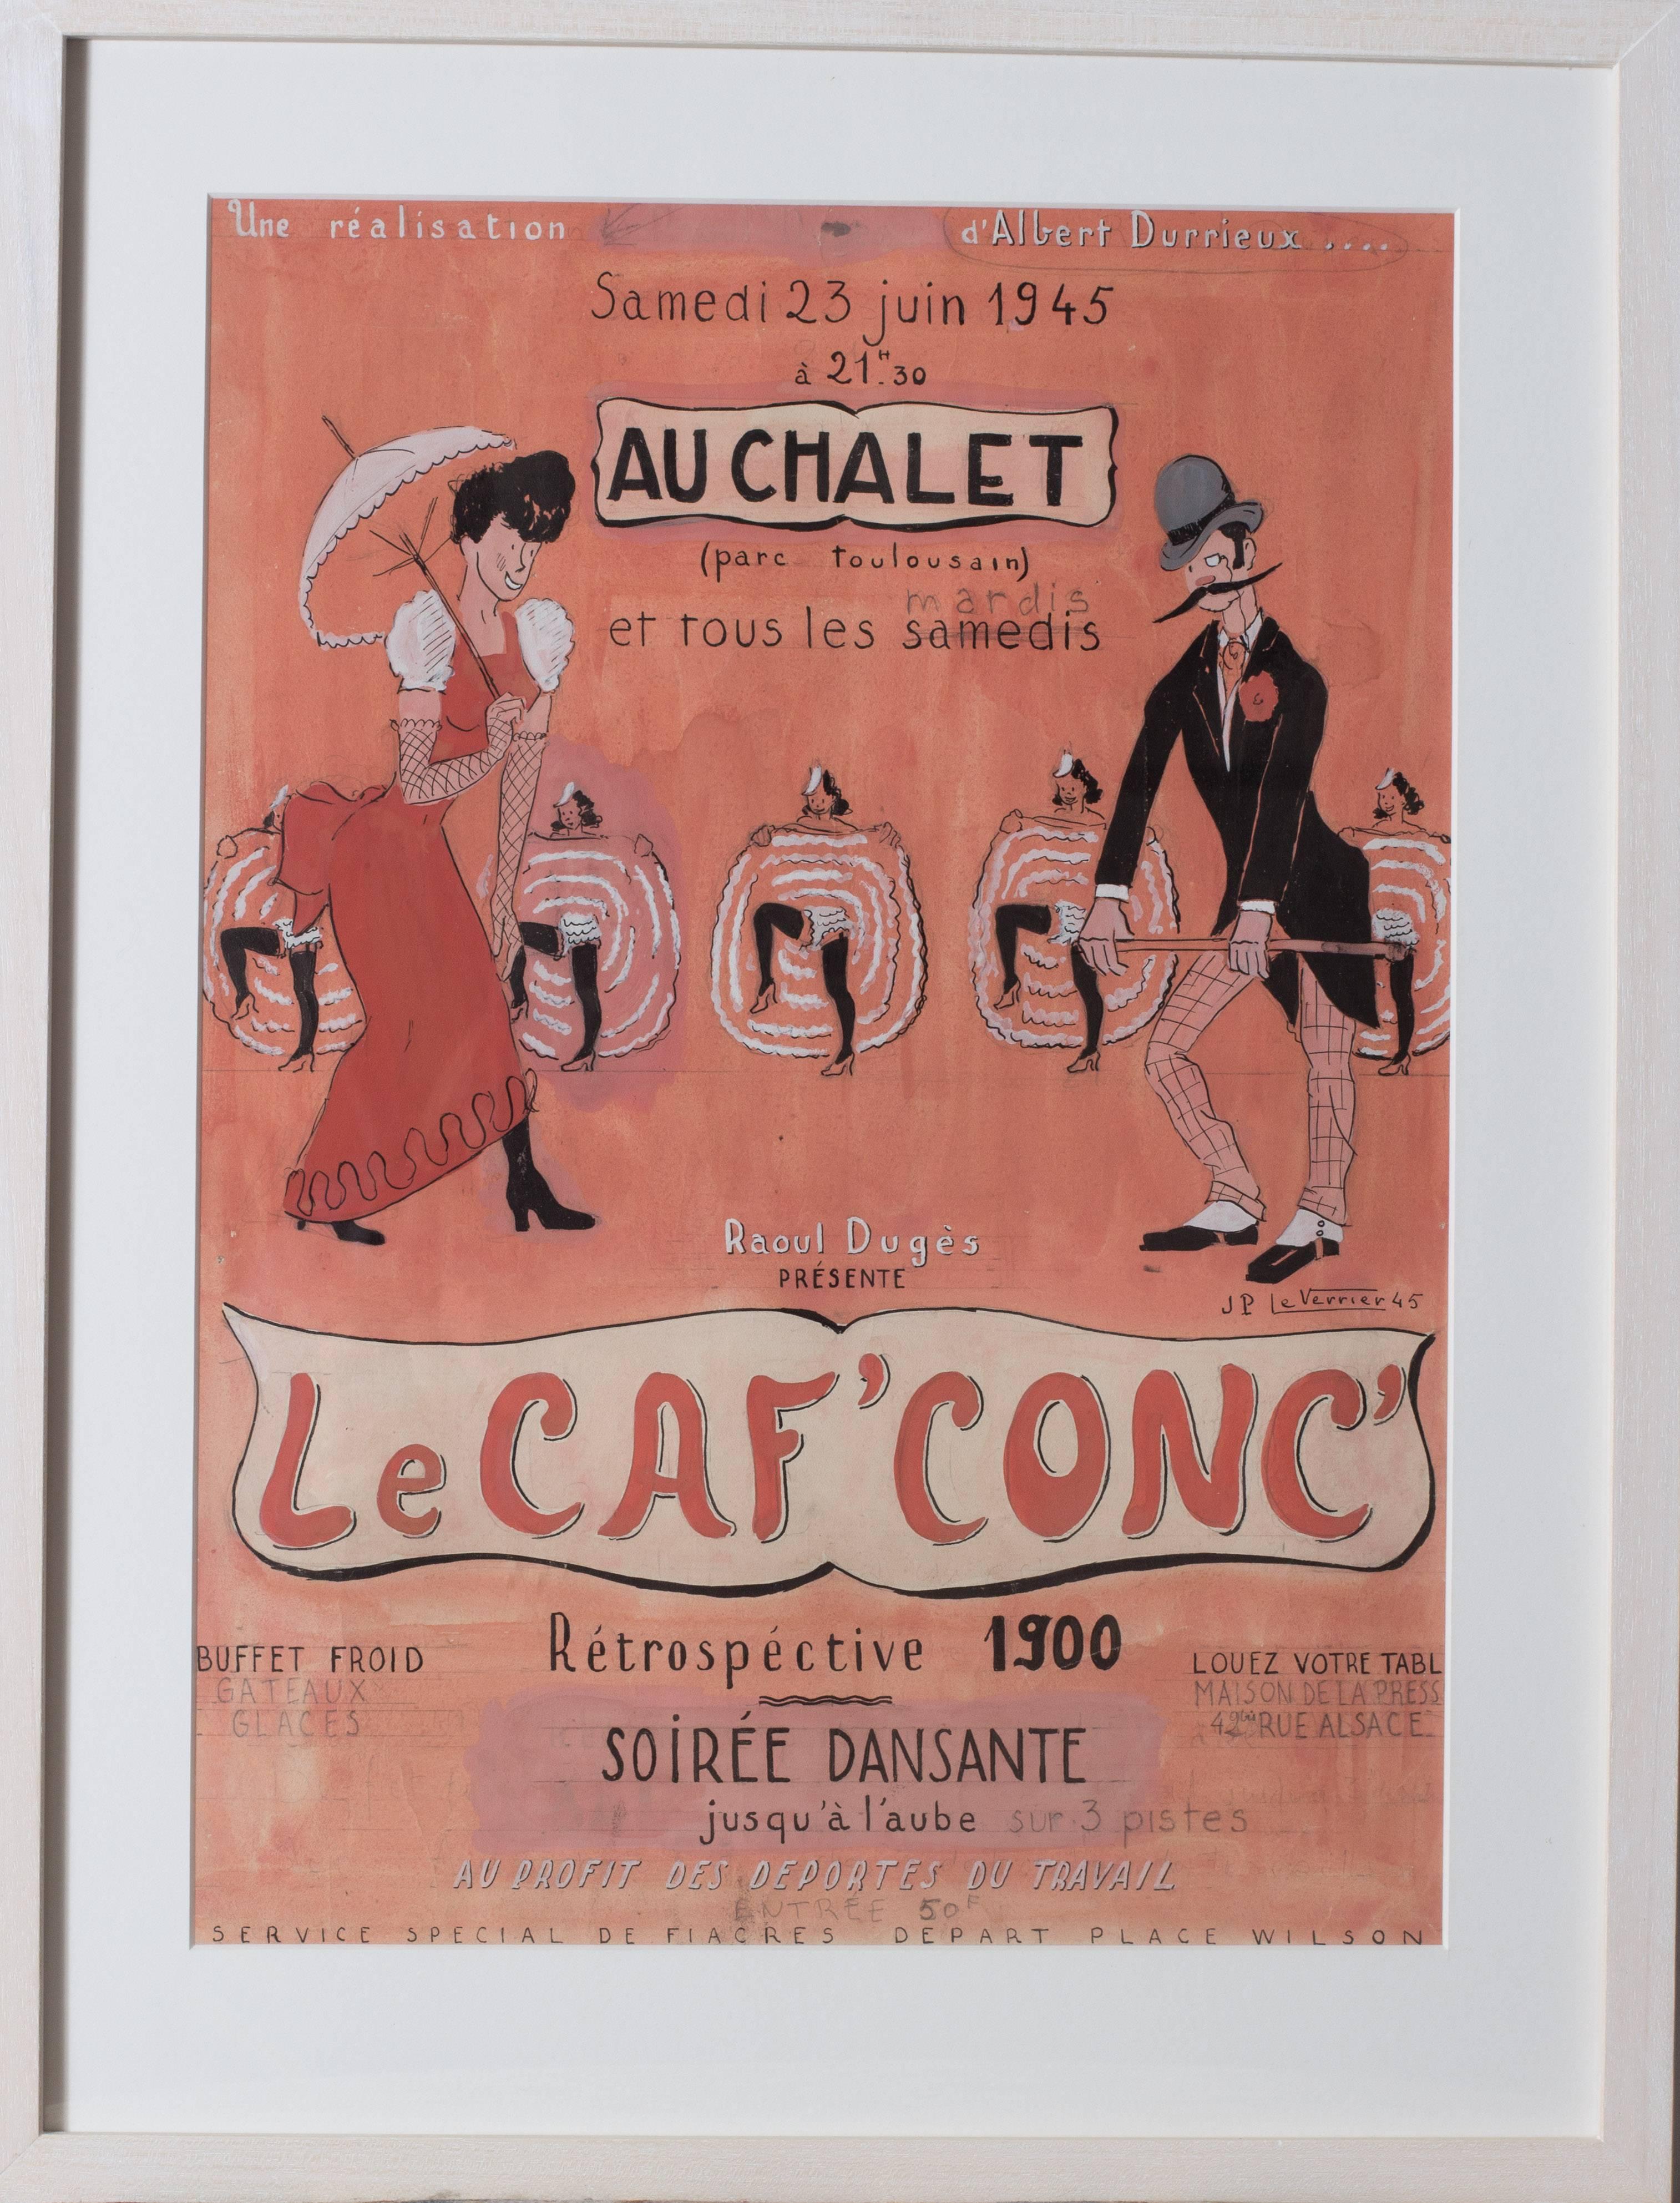 Le Caf’ Conc
A poster design for a post-liberation costume ball (retrospective 1900) on 23rd June 1945 designed by Jean Paul Le Verrier (1922-1996)
Pencil, ink and gouache
64.2 x 48.6cm.
